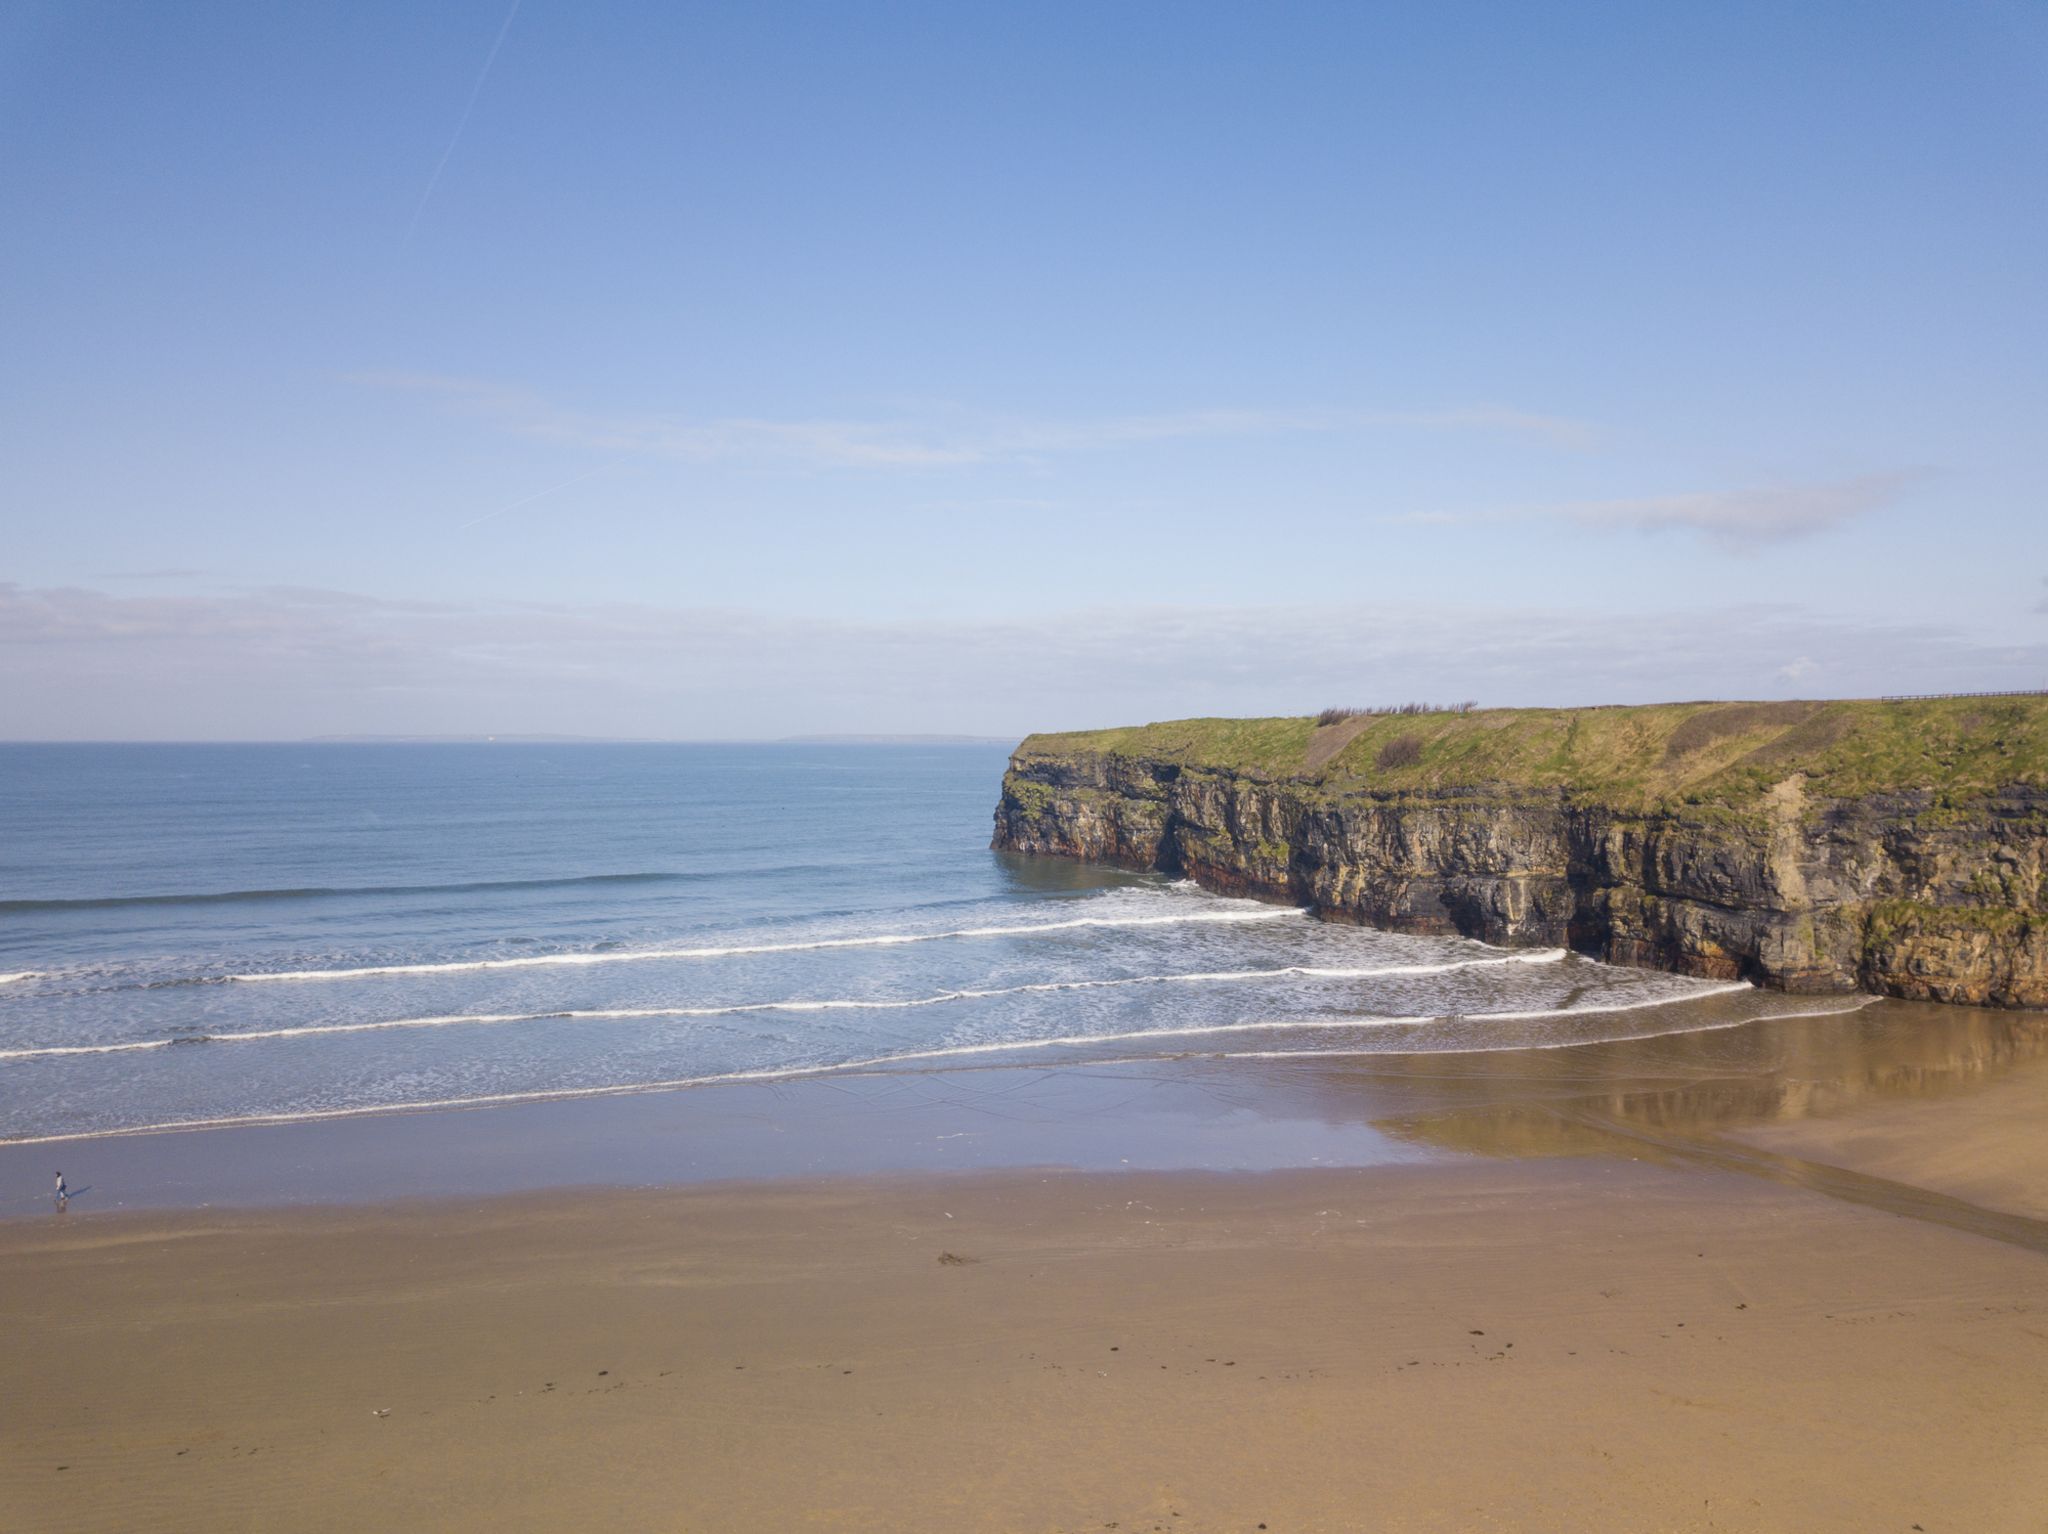 The pair got into difficulty in waters near Ballybunion beach in County Kerry.